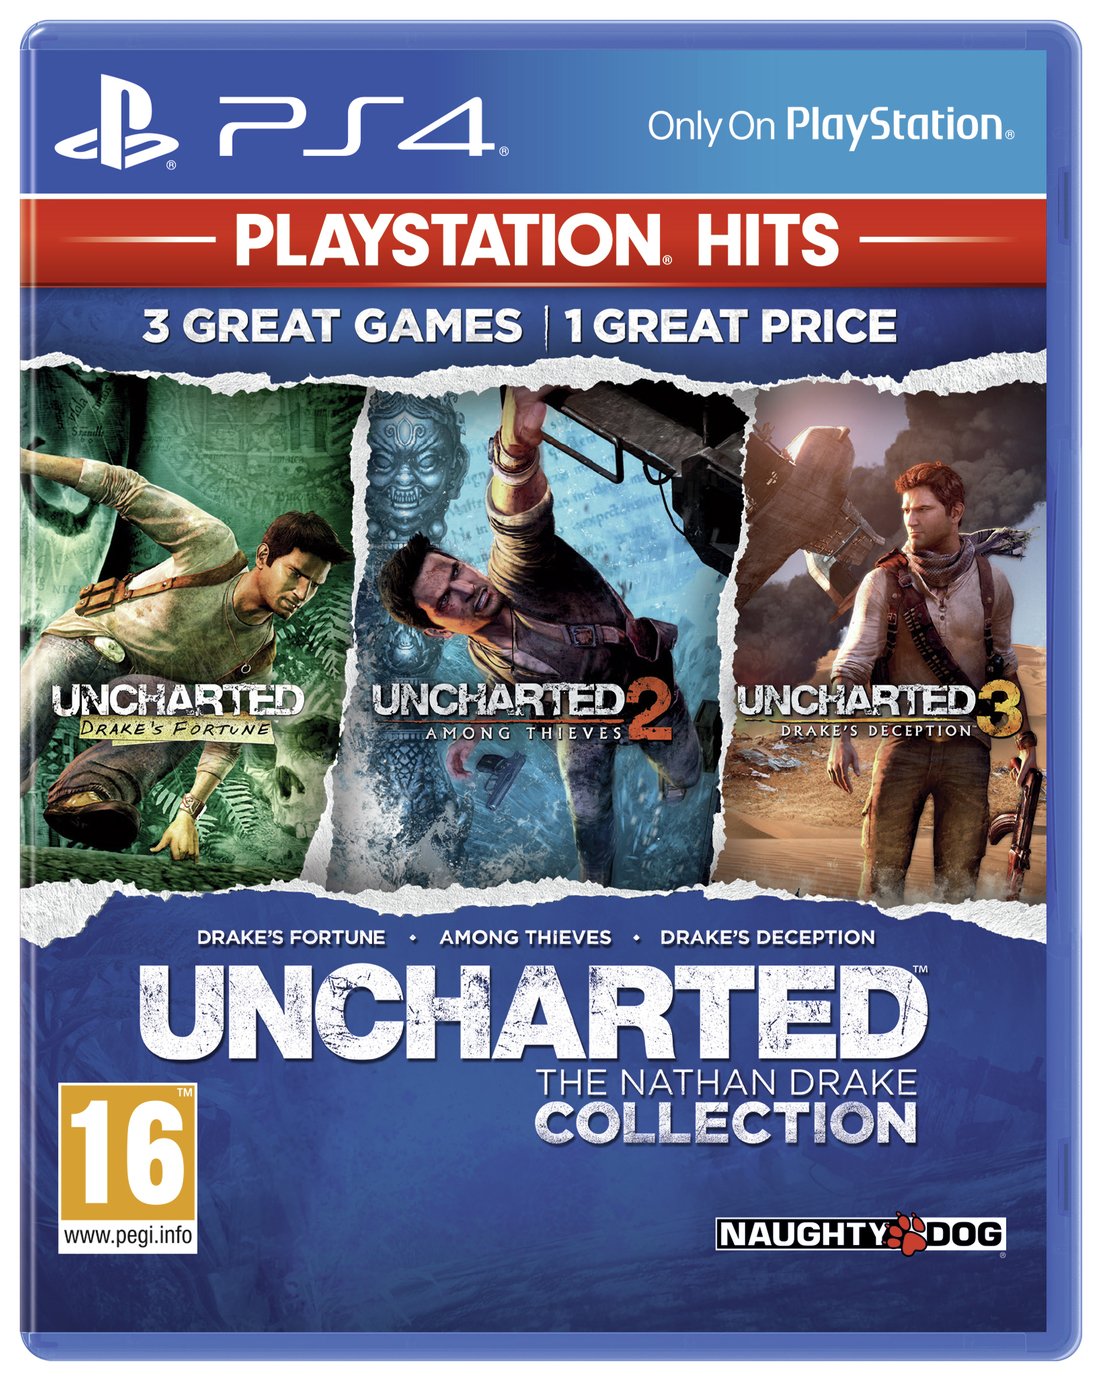 ps4 uncharted collection